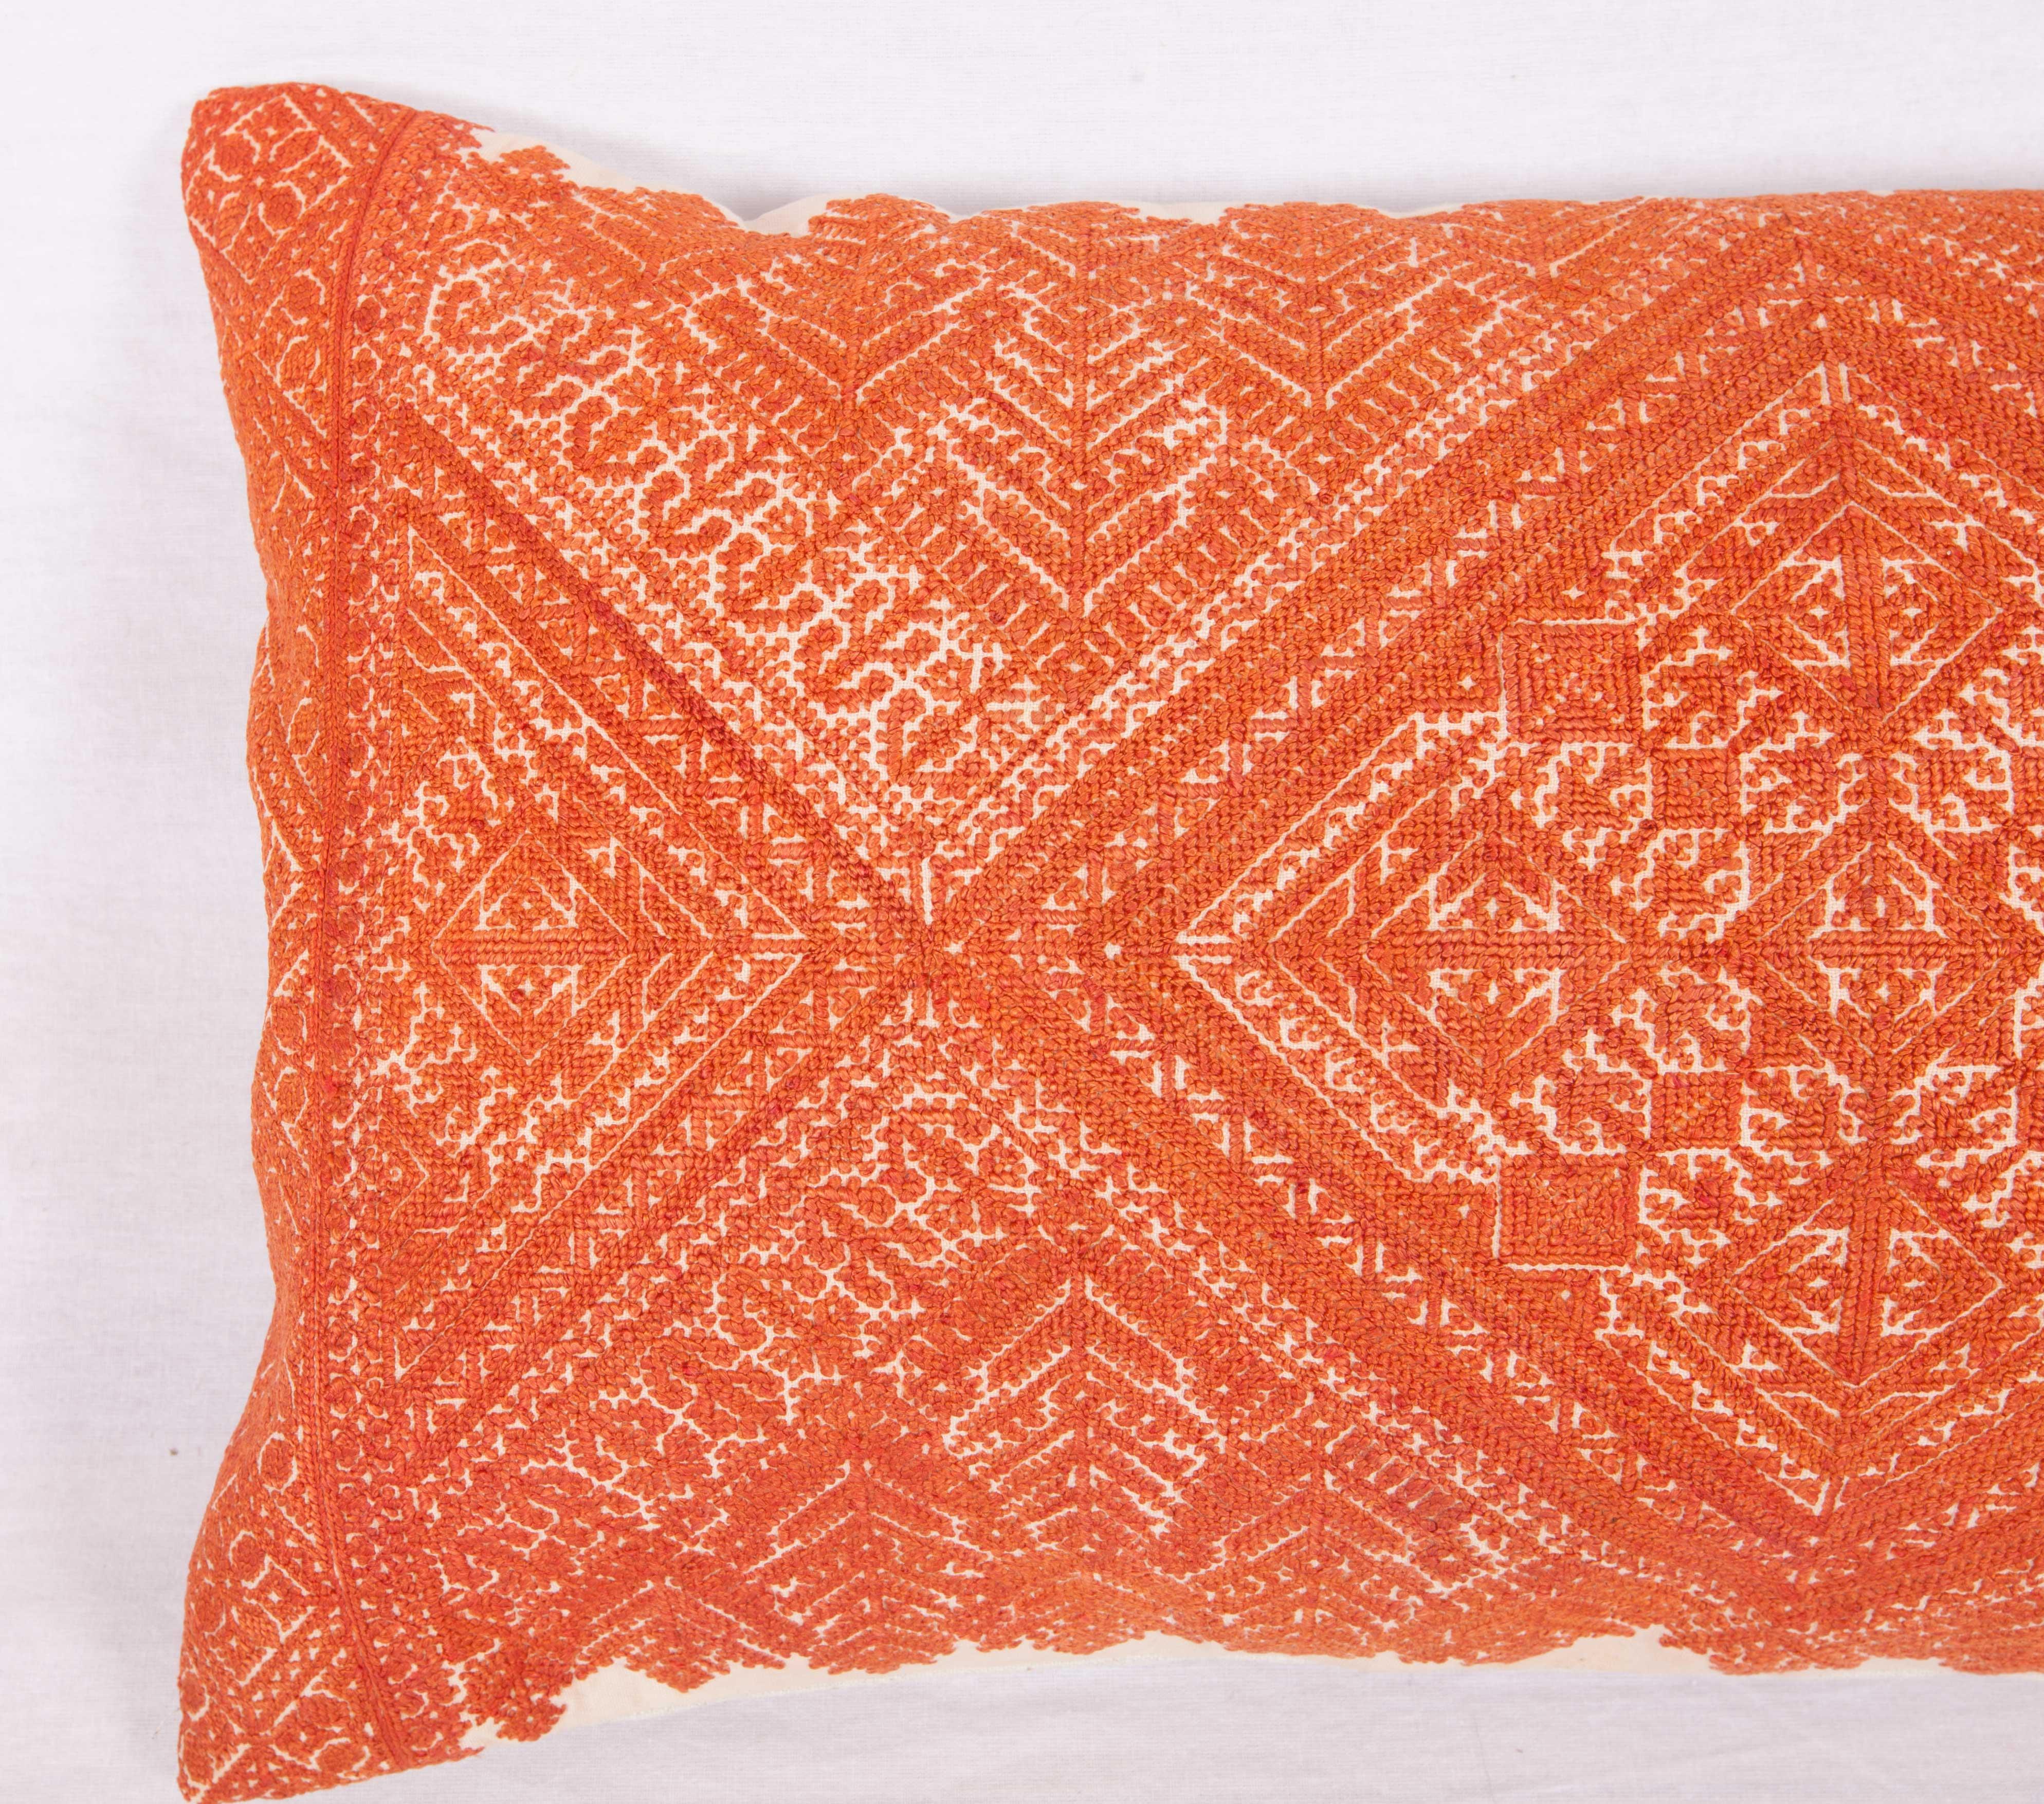 Moroccan Pillow Case Made from an Early 20th Century Fez Embroidery from Morocco